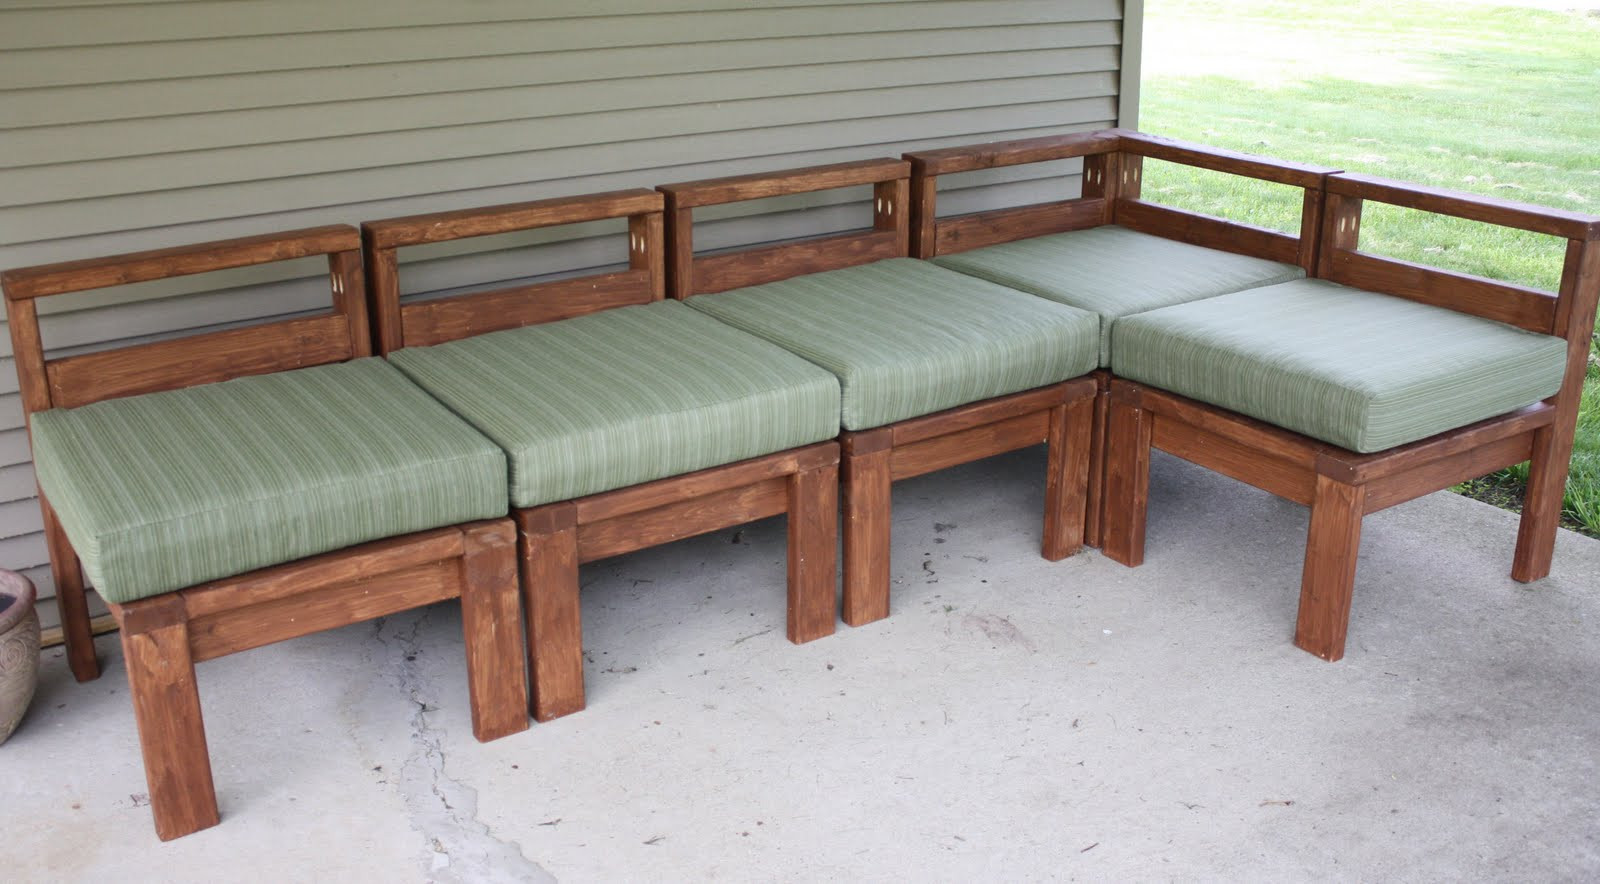 DIY Outdoor Sectional 2X4
 More Like Home 2x4 Outdoor Sectional